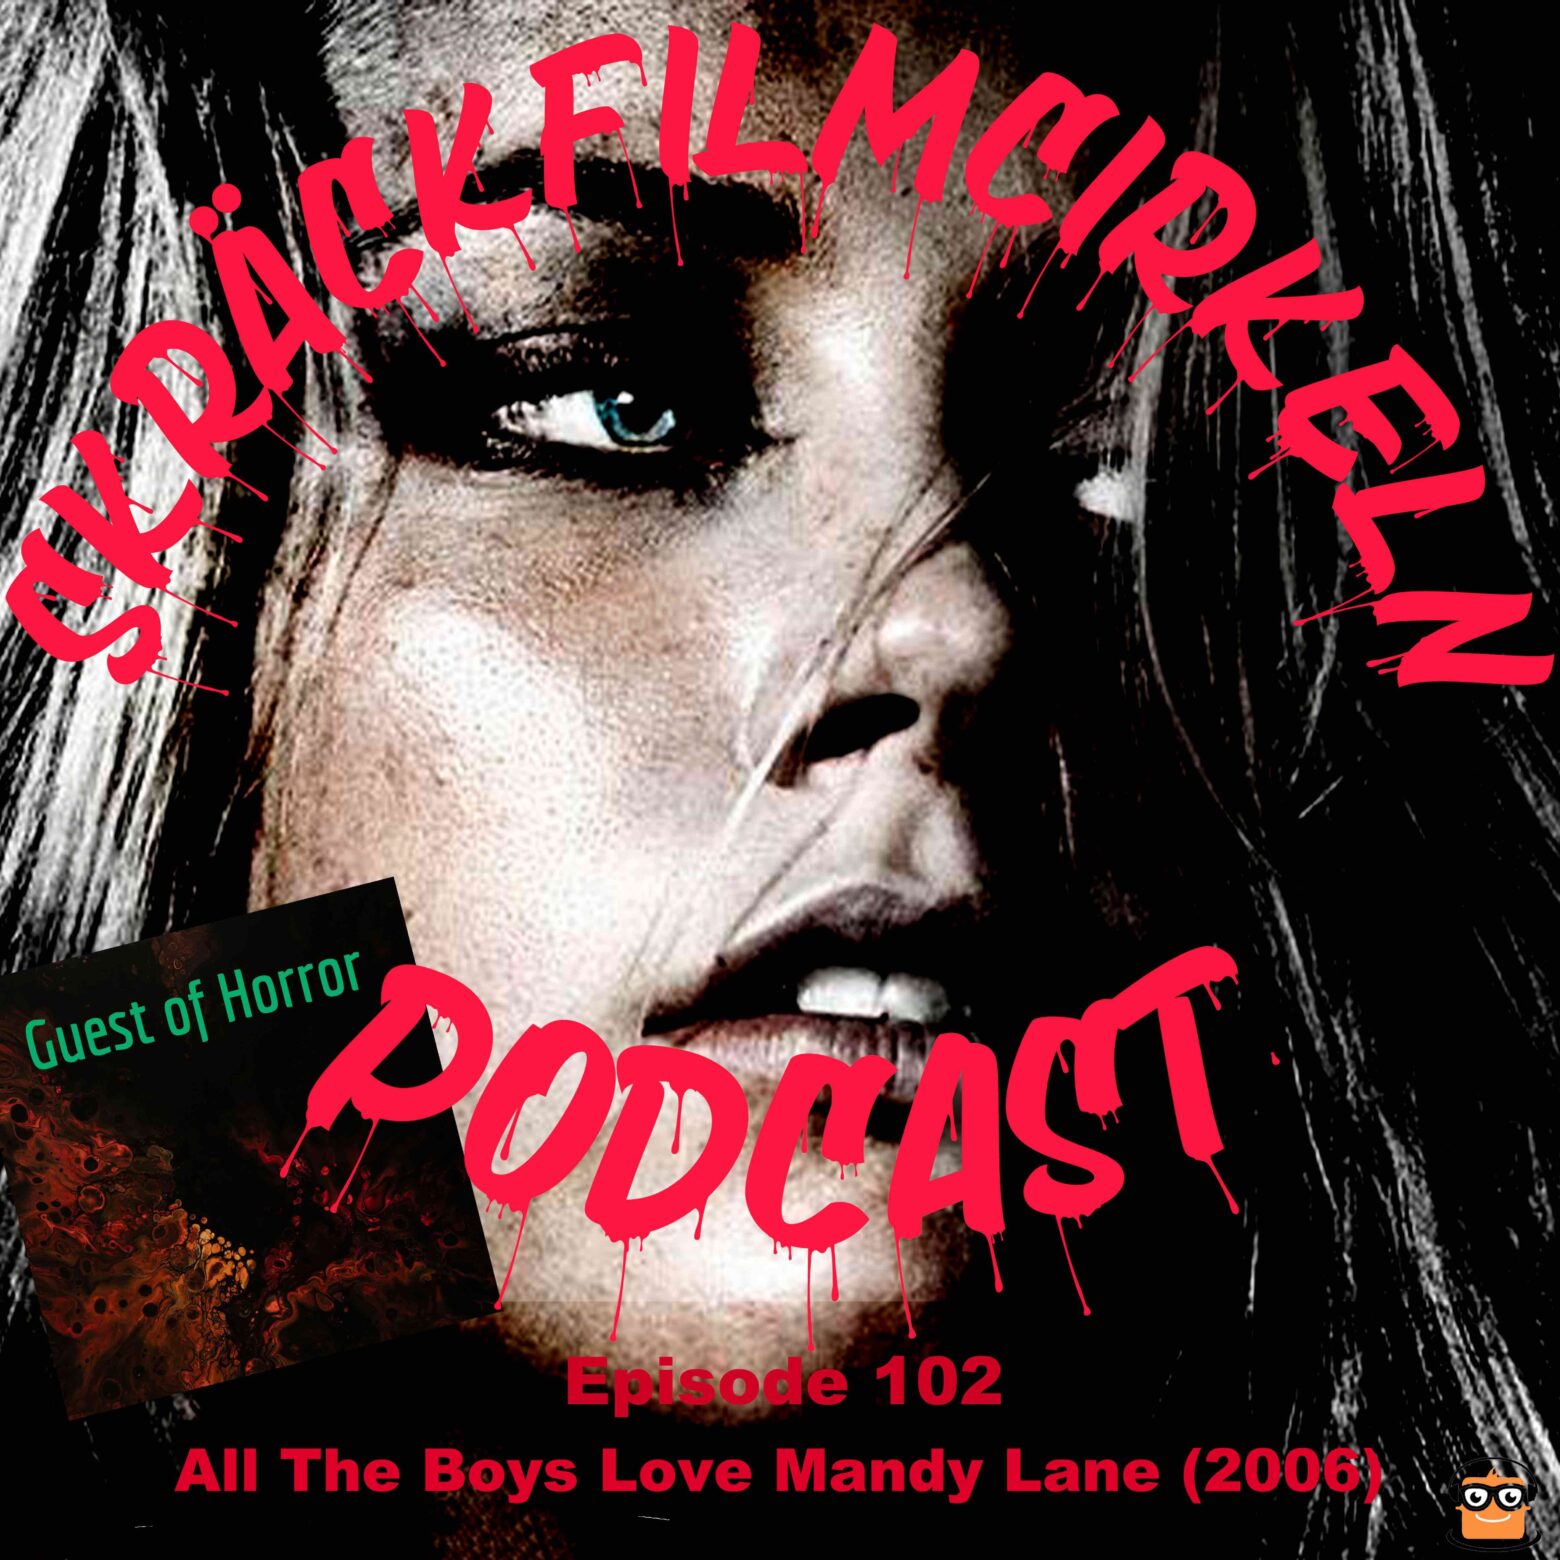 Episode 102 – All The Boys Love Mandy Lane (2006) Feat Guest of Horror